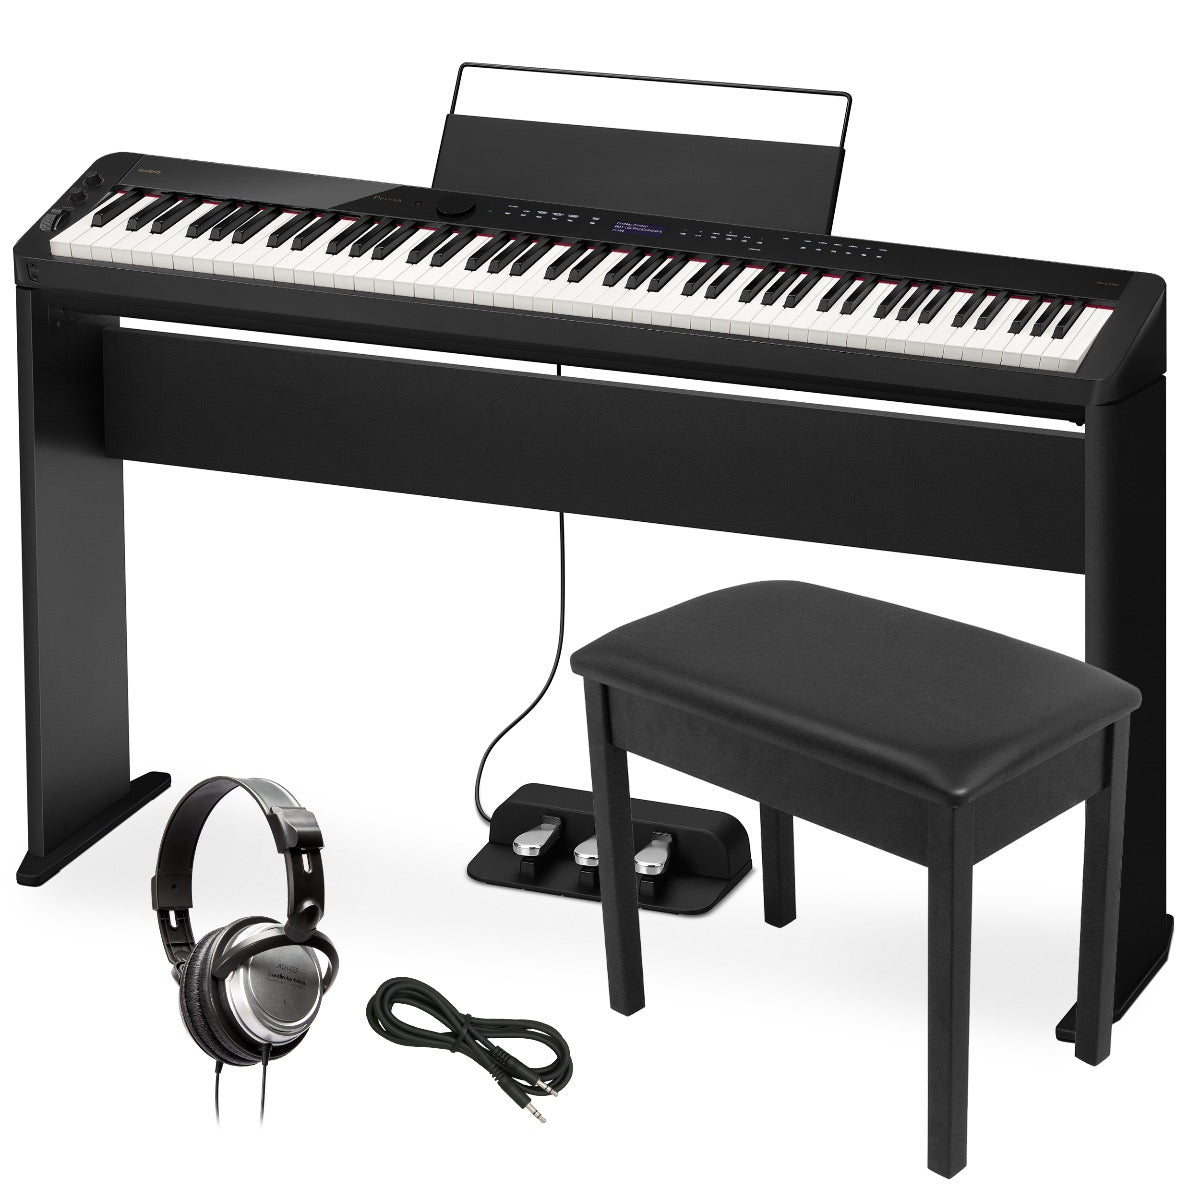 Casio Privia PX-S3100 Digital Piano Offers Stunning Realism and Performance  at A Highly Affordable Price